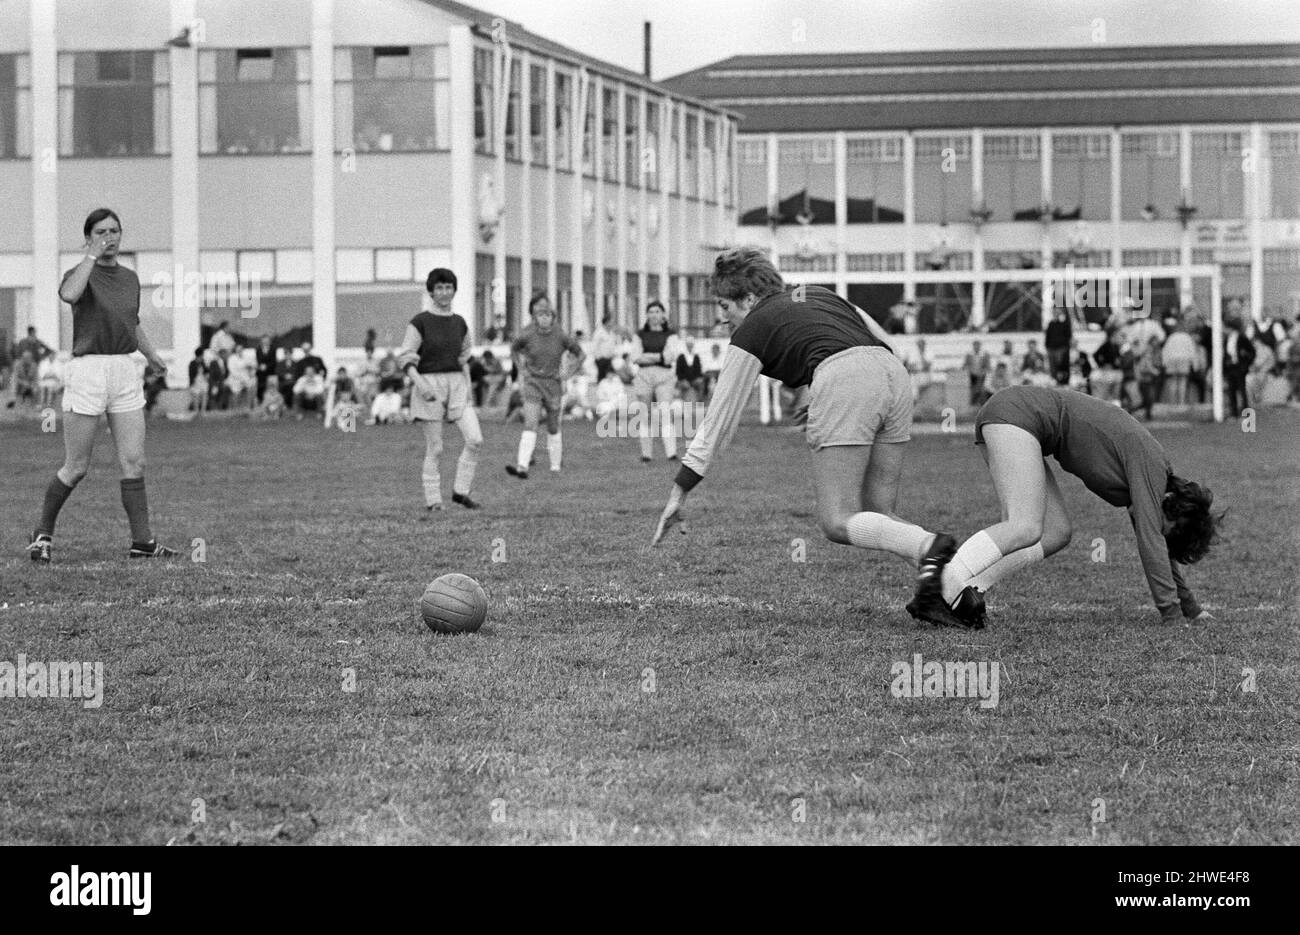 Ladies football match. Southampton Ladies v Beecham Belles from Berkshire. Final score 13 - 0 to Southampton Ladies. Semi-final of the Women's International Football Competition. Clacton, Essex. Bottoms up for ten goal girl Sue Lopez and Belle Pauline Barnett (right). 6th September 1969. Stock Photo